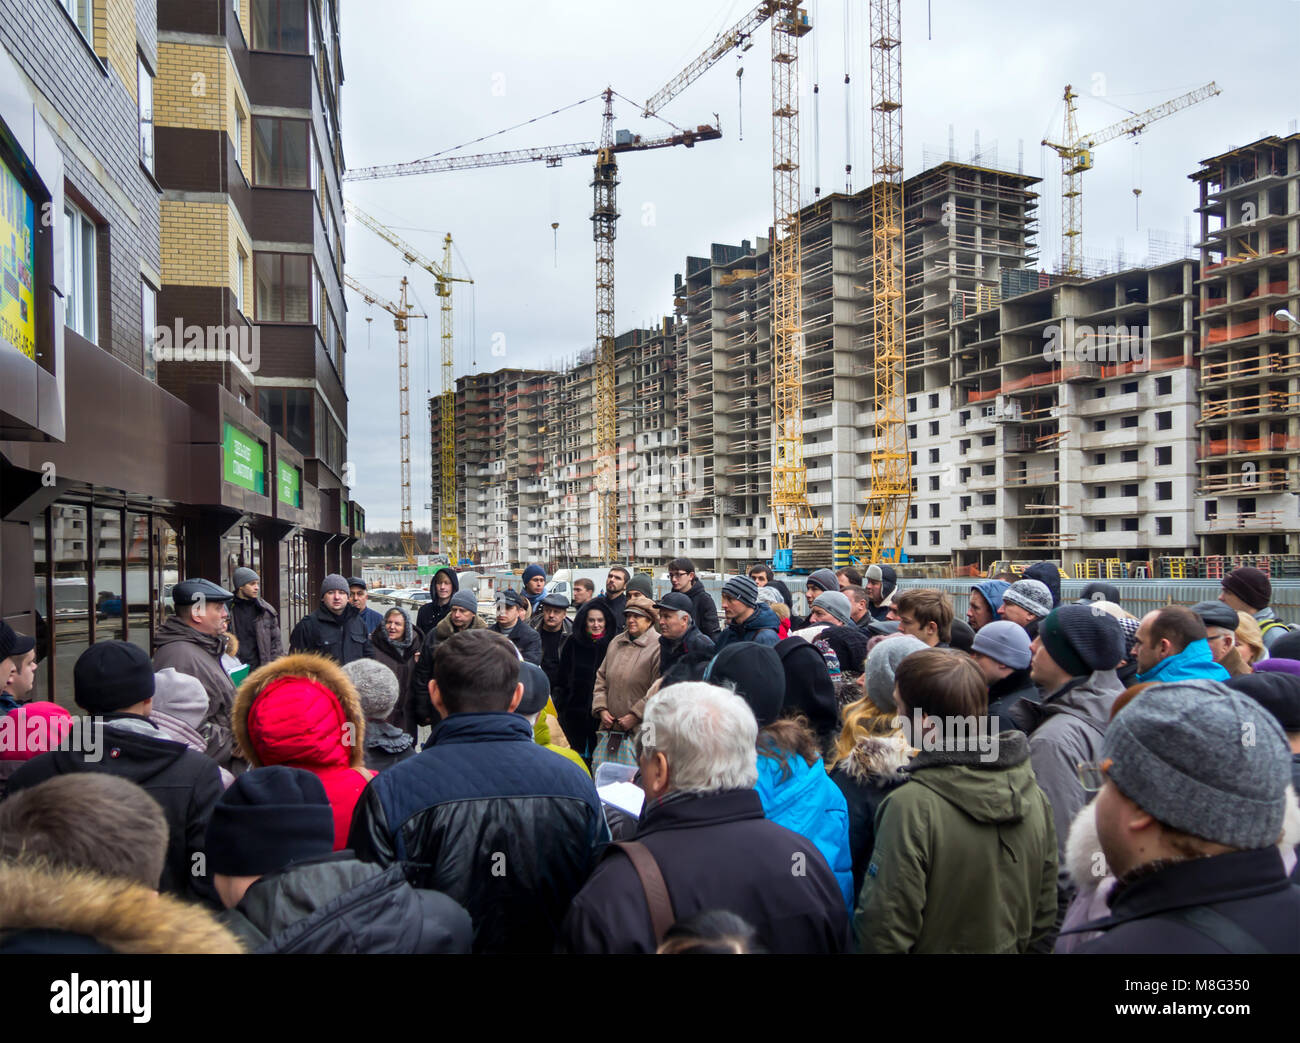 Voronezh, Russia - December 20, 2015: Meeting people at the construction site of a new home Stock Photo